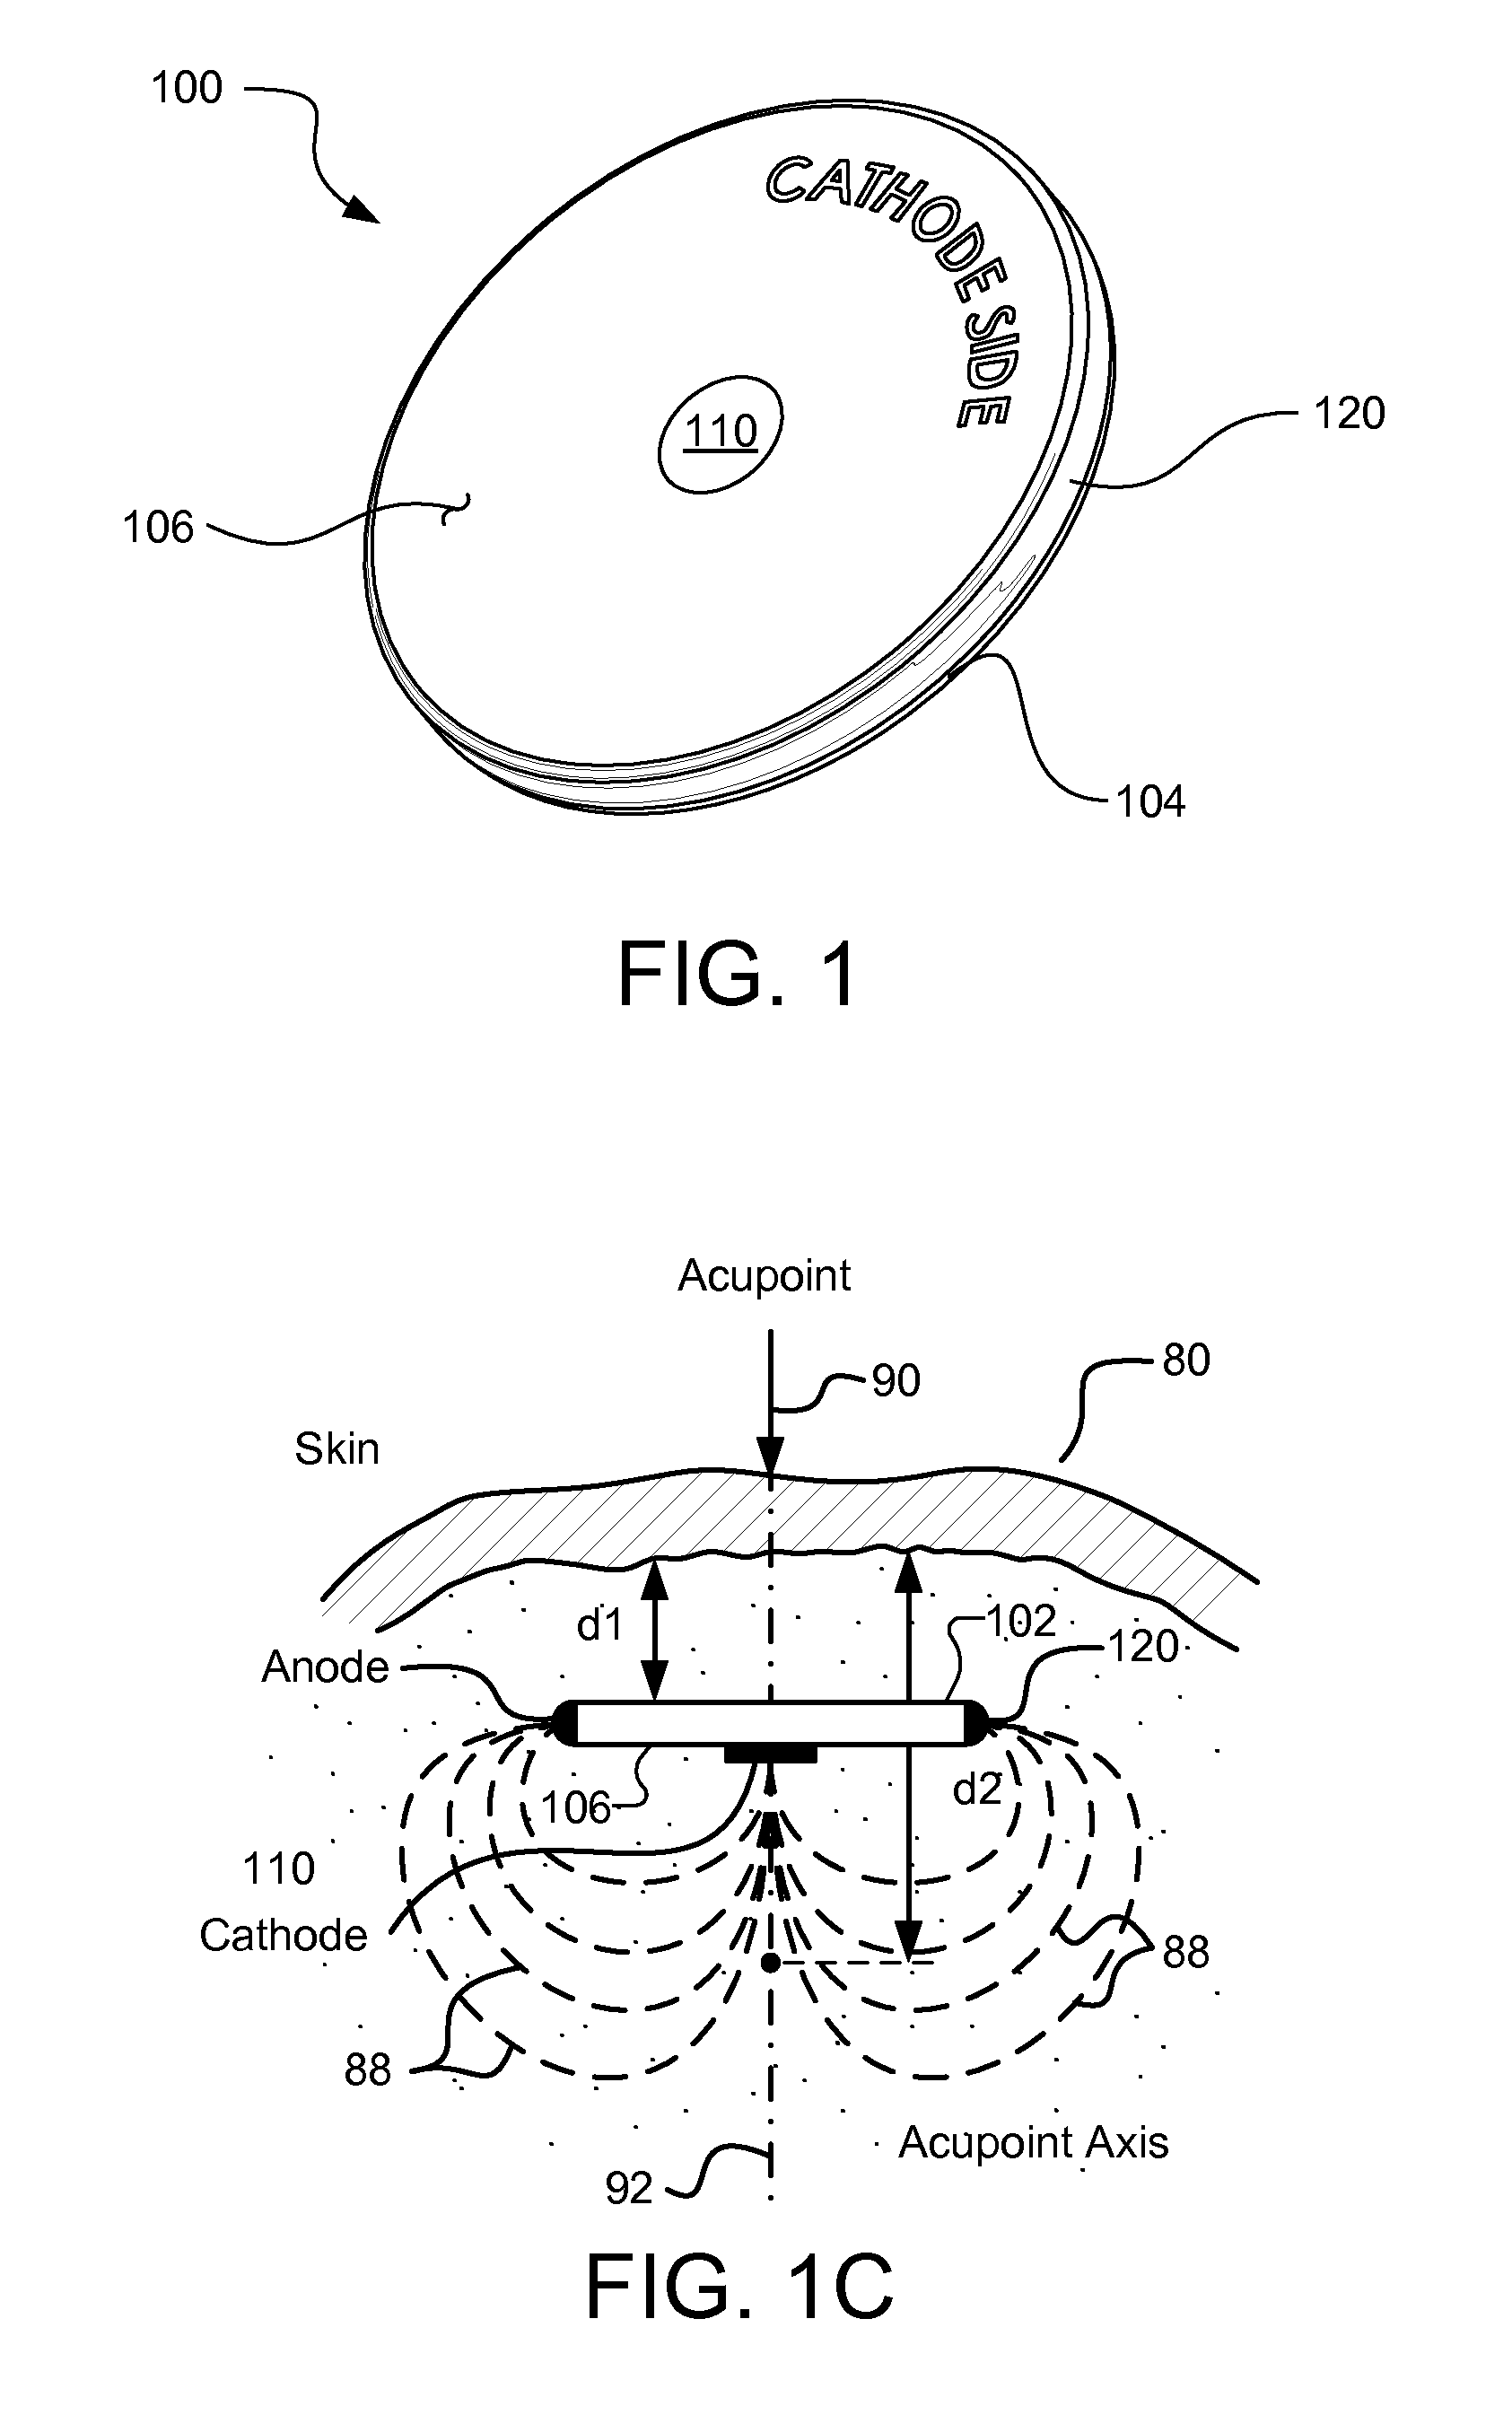 Methods and Systems for Treating a Chronic Low Back Pain Condition Using an Implantable Electroacupuncture Device